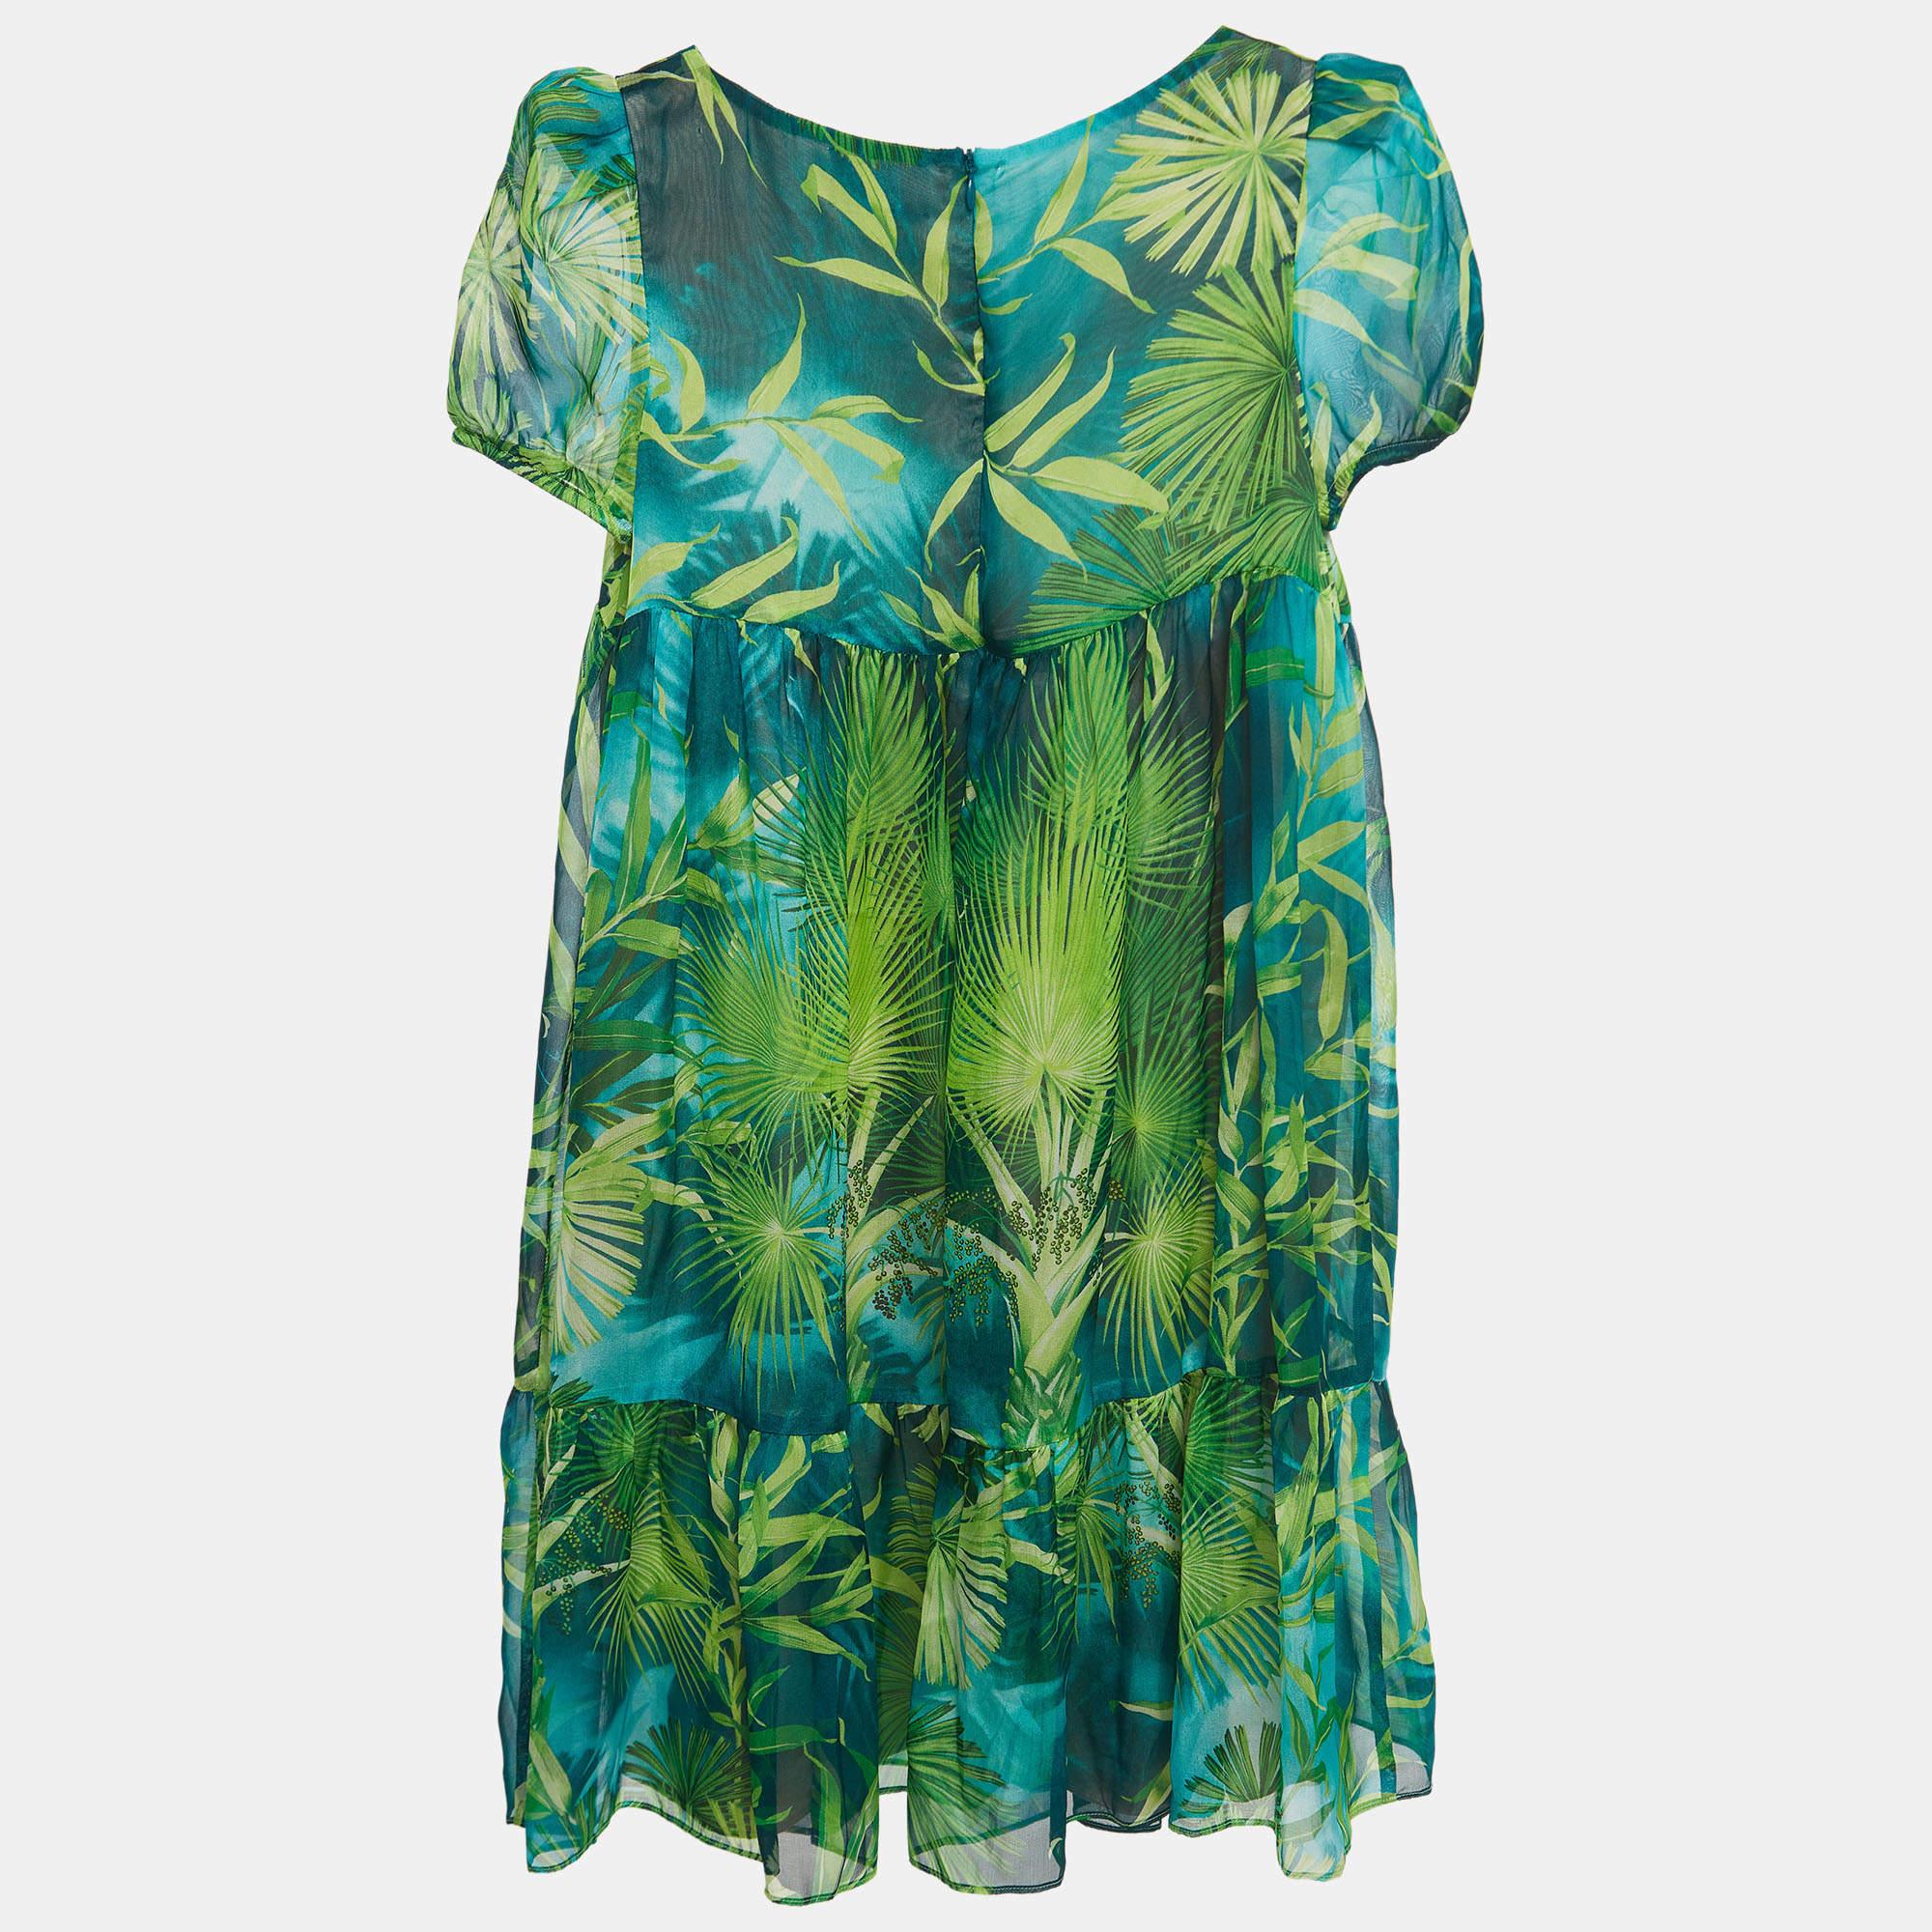 Elevate your little one's style with the Versace green dress. Meticulously crafted for durability and comfort, it has a gorgeous leaf print design that's perfect for all seasons. Can be easily styled with flats as well as sneakers.

Kids clothes